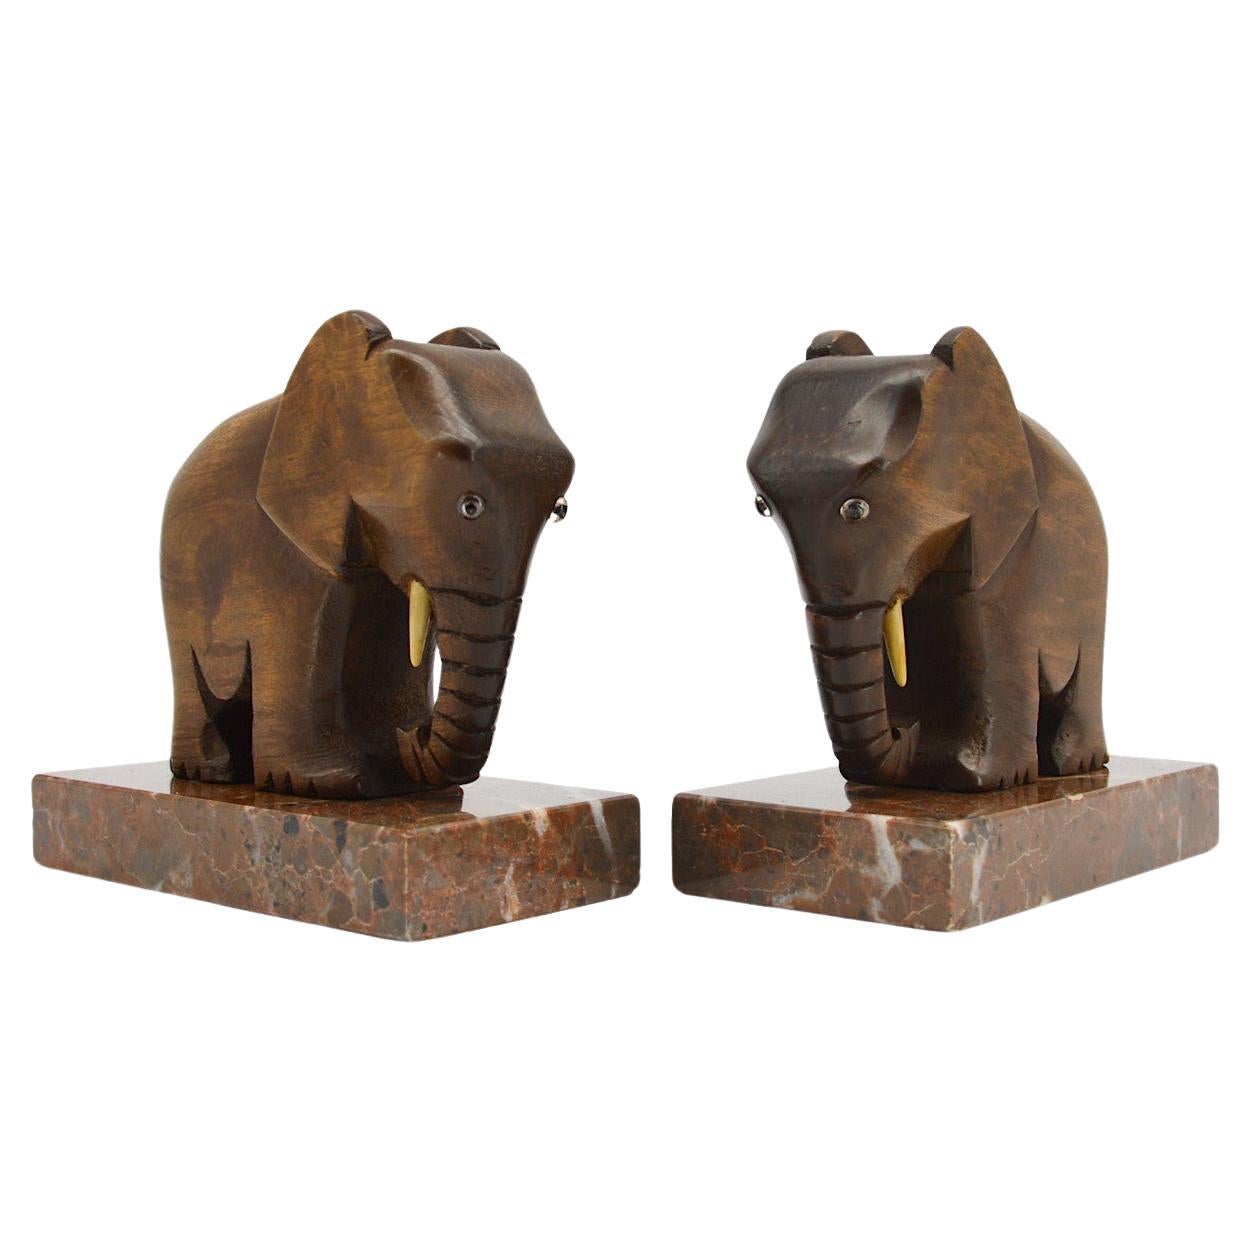 French Art Deco Wood Elephants Bookends, 1930s For Sale